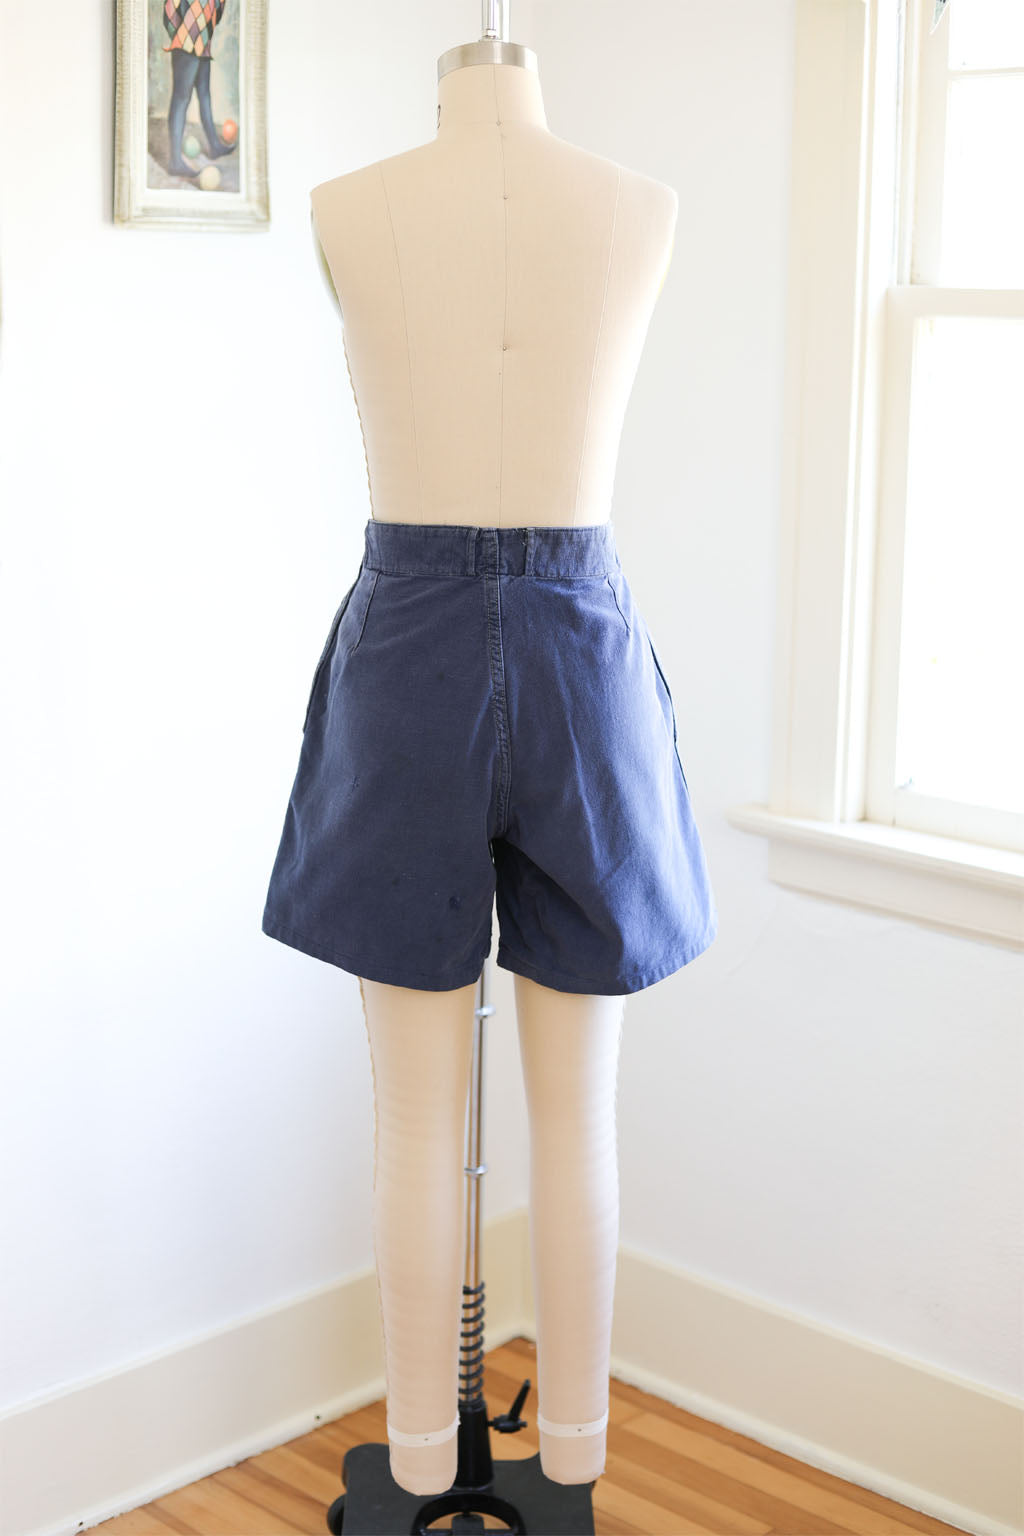 RARE Vintage 1940s Well-Worn Swedish Armed Forces Workwear Indigo Blue Denim Button-Fly Cotton Shorts -- Choose Your Pair!